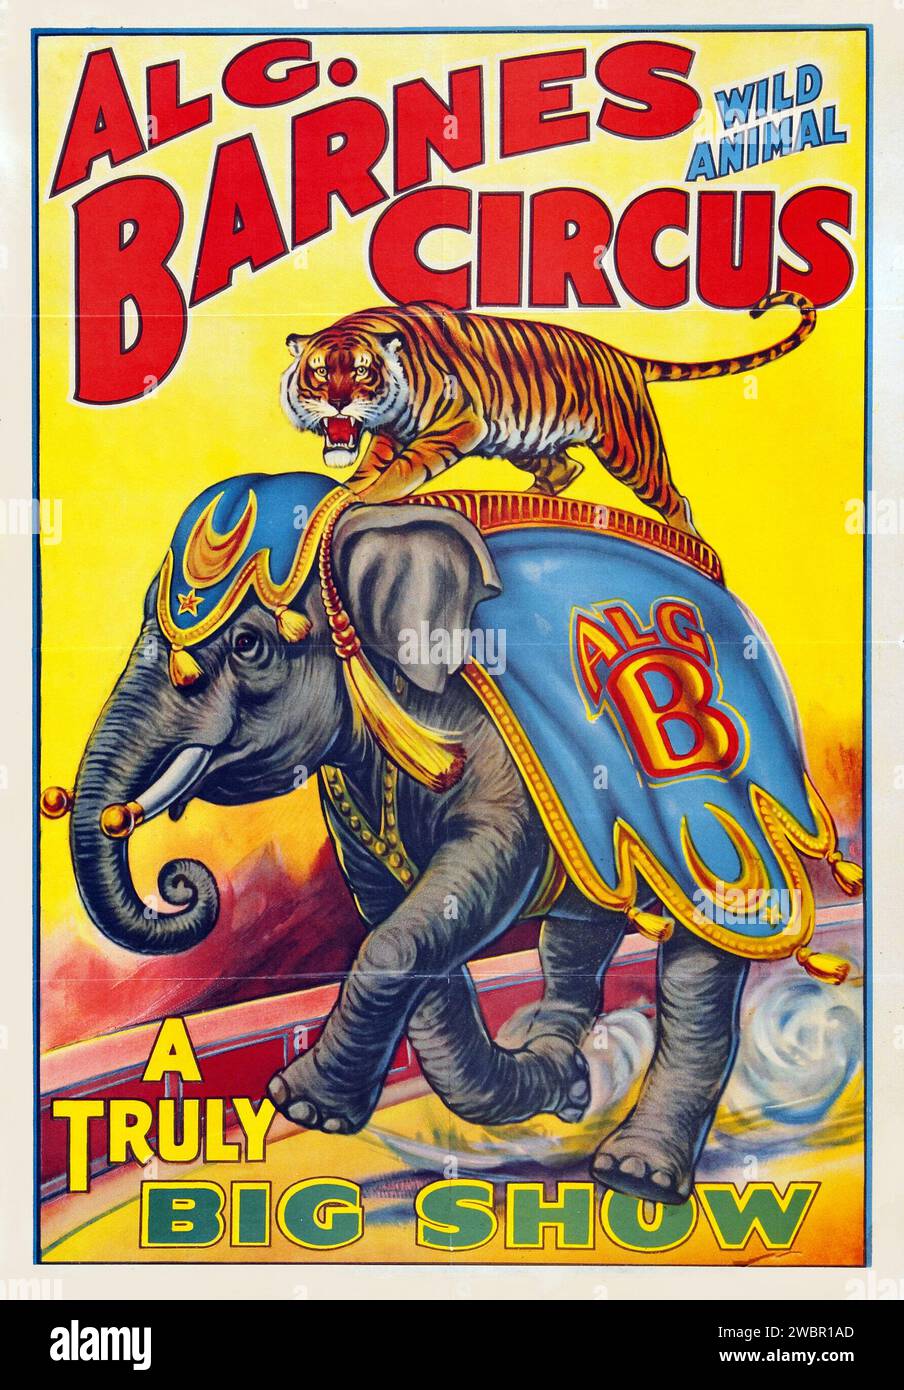 Al. G. Barnes Circus (1920s). Circus Poster feat a tiger and a circus elephant Stock Photo